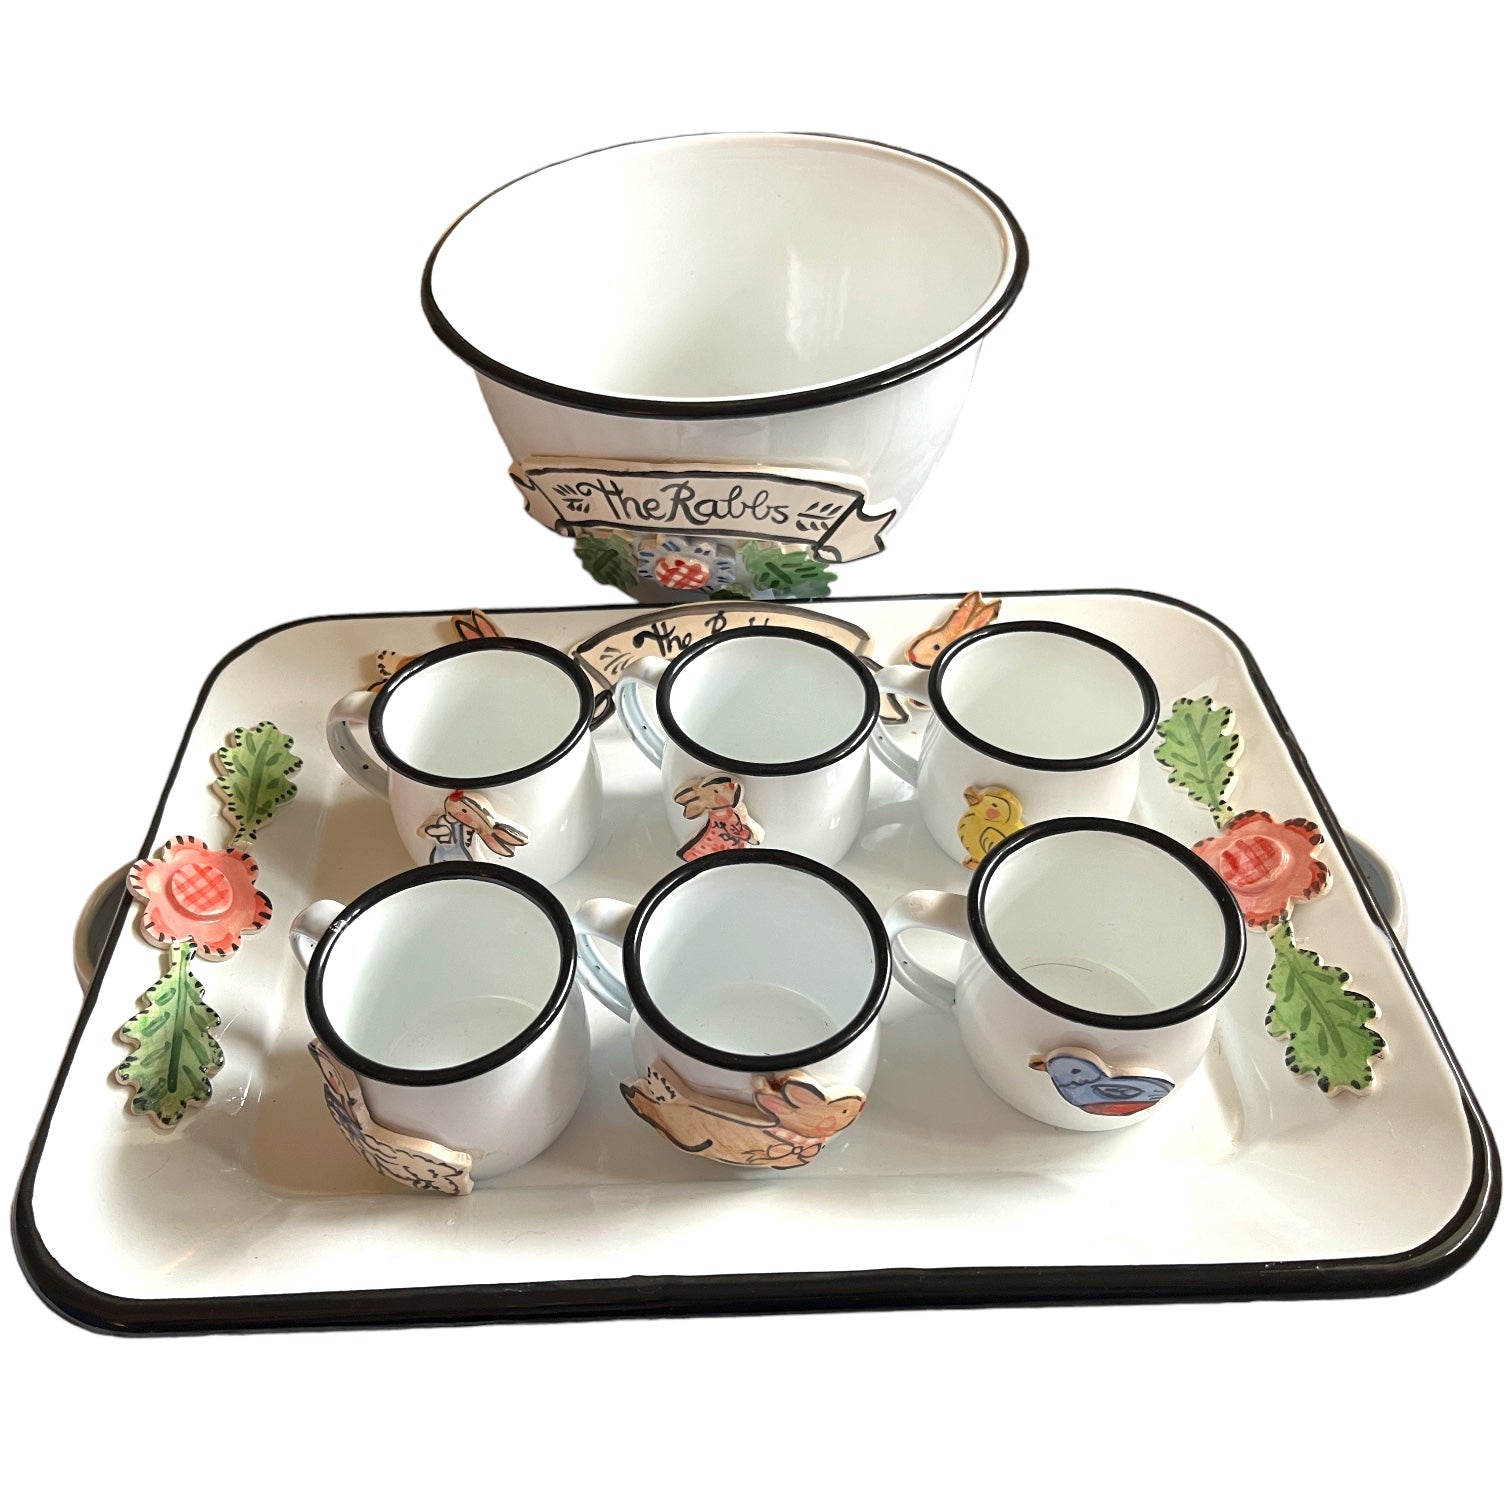 Popcorn Bowl set with Tray and 6 cups - Premium  from Tricia Lowenfield Shop 